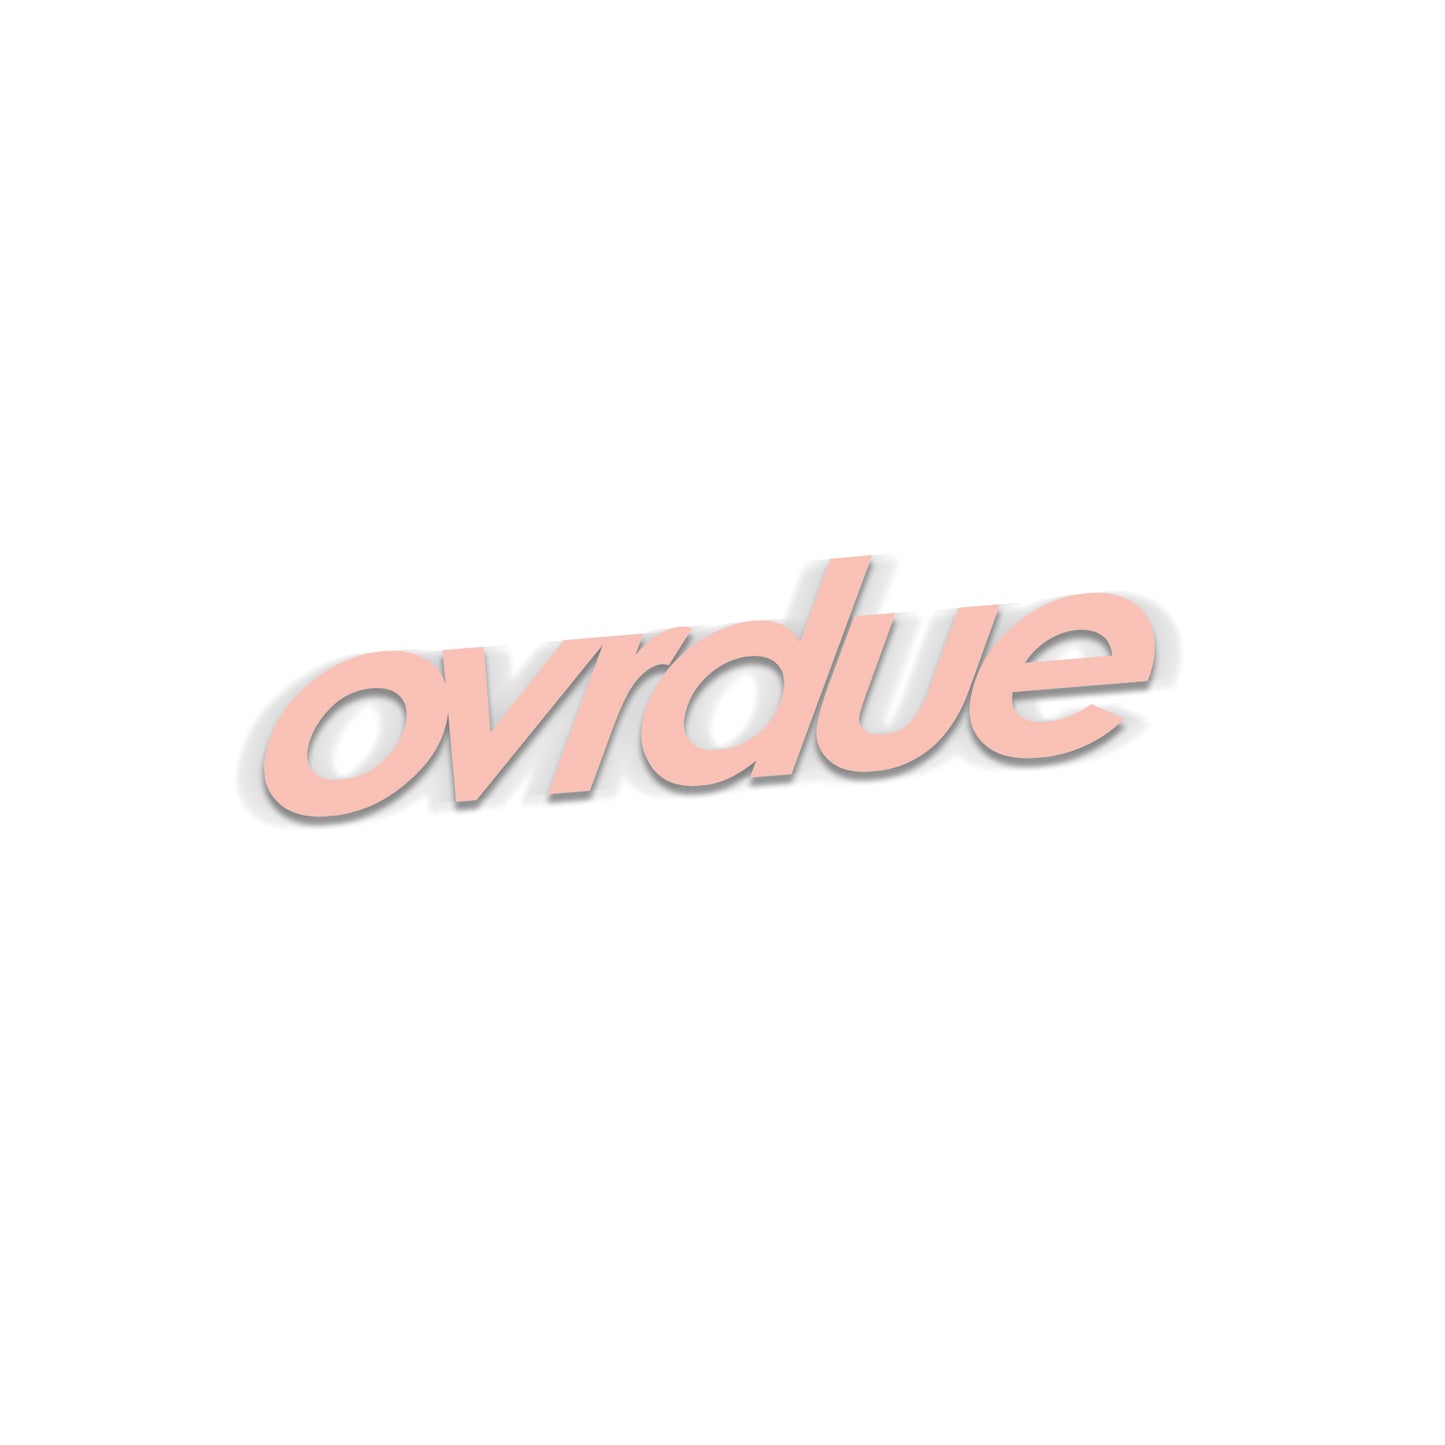 OVRDUE DECAL